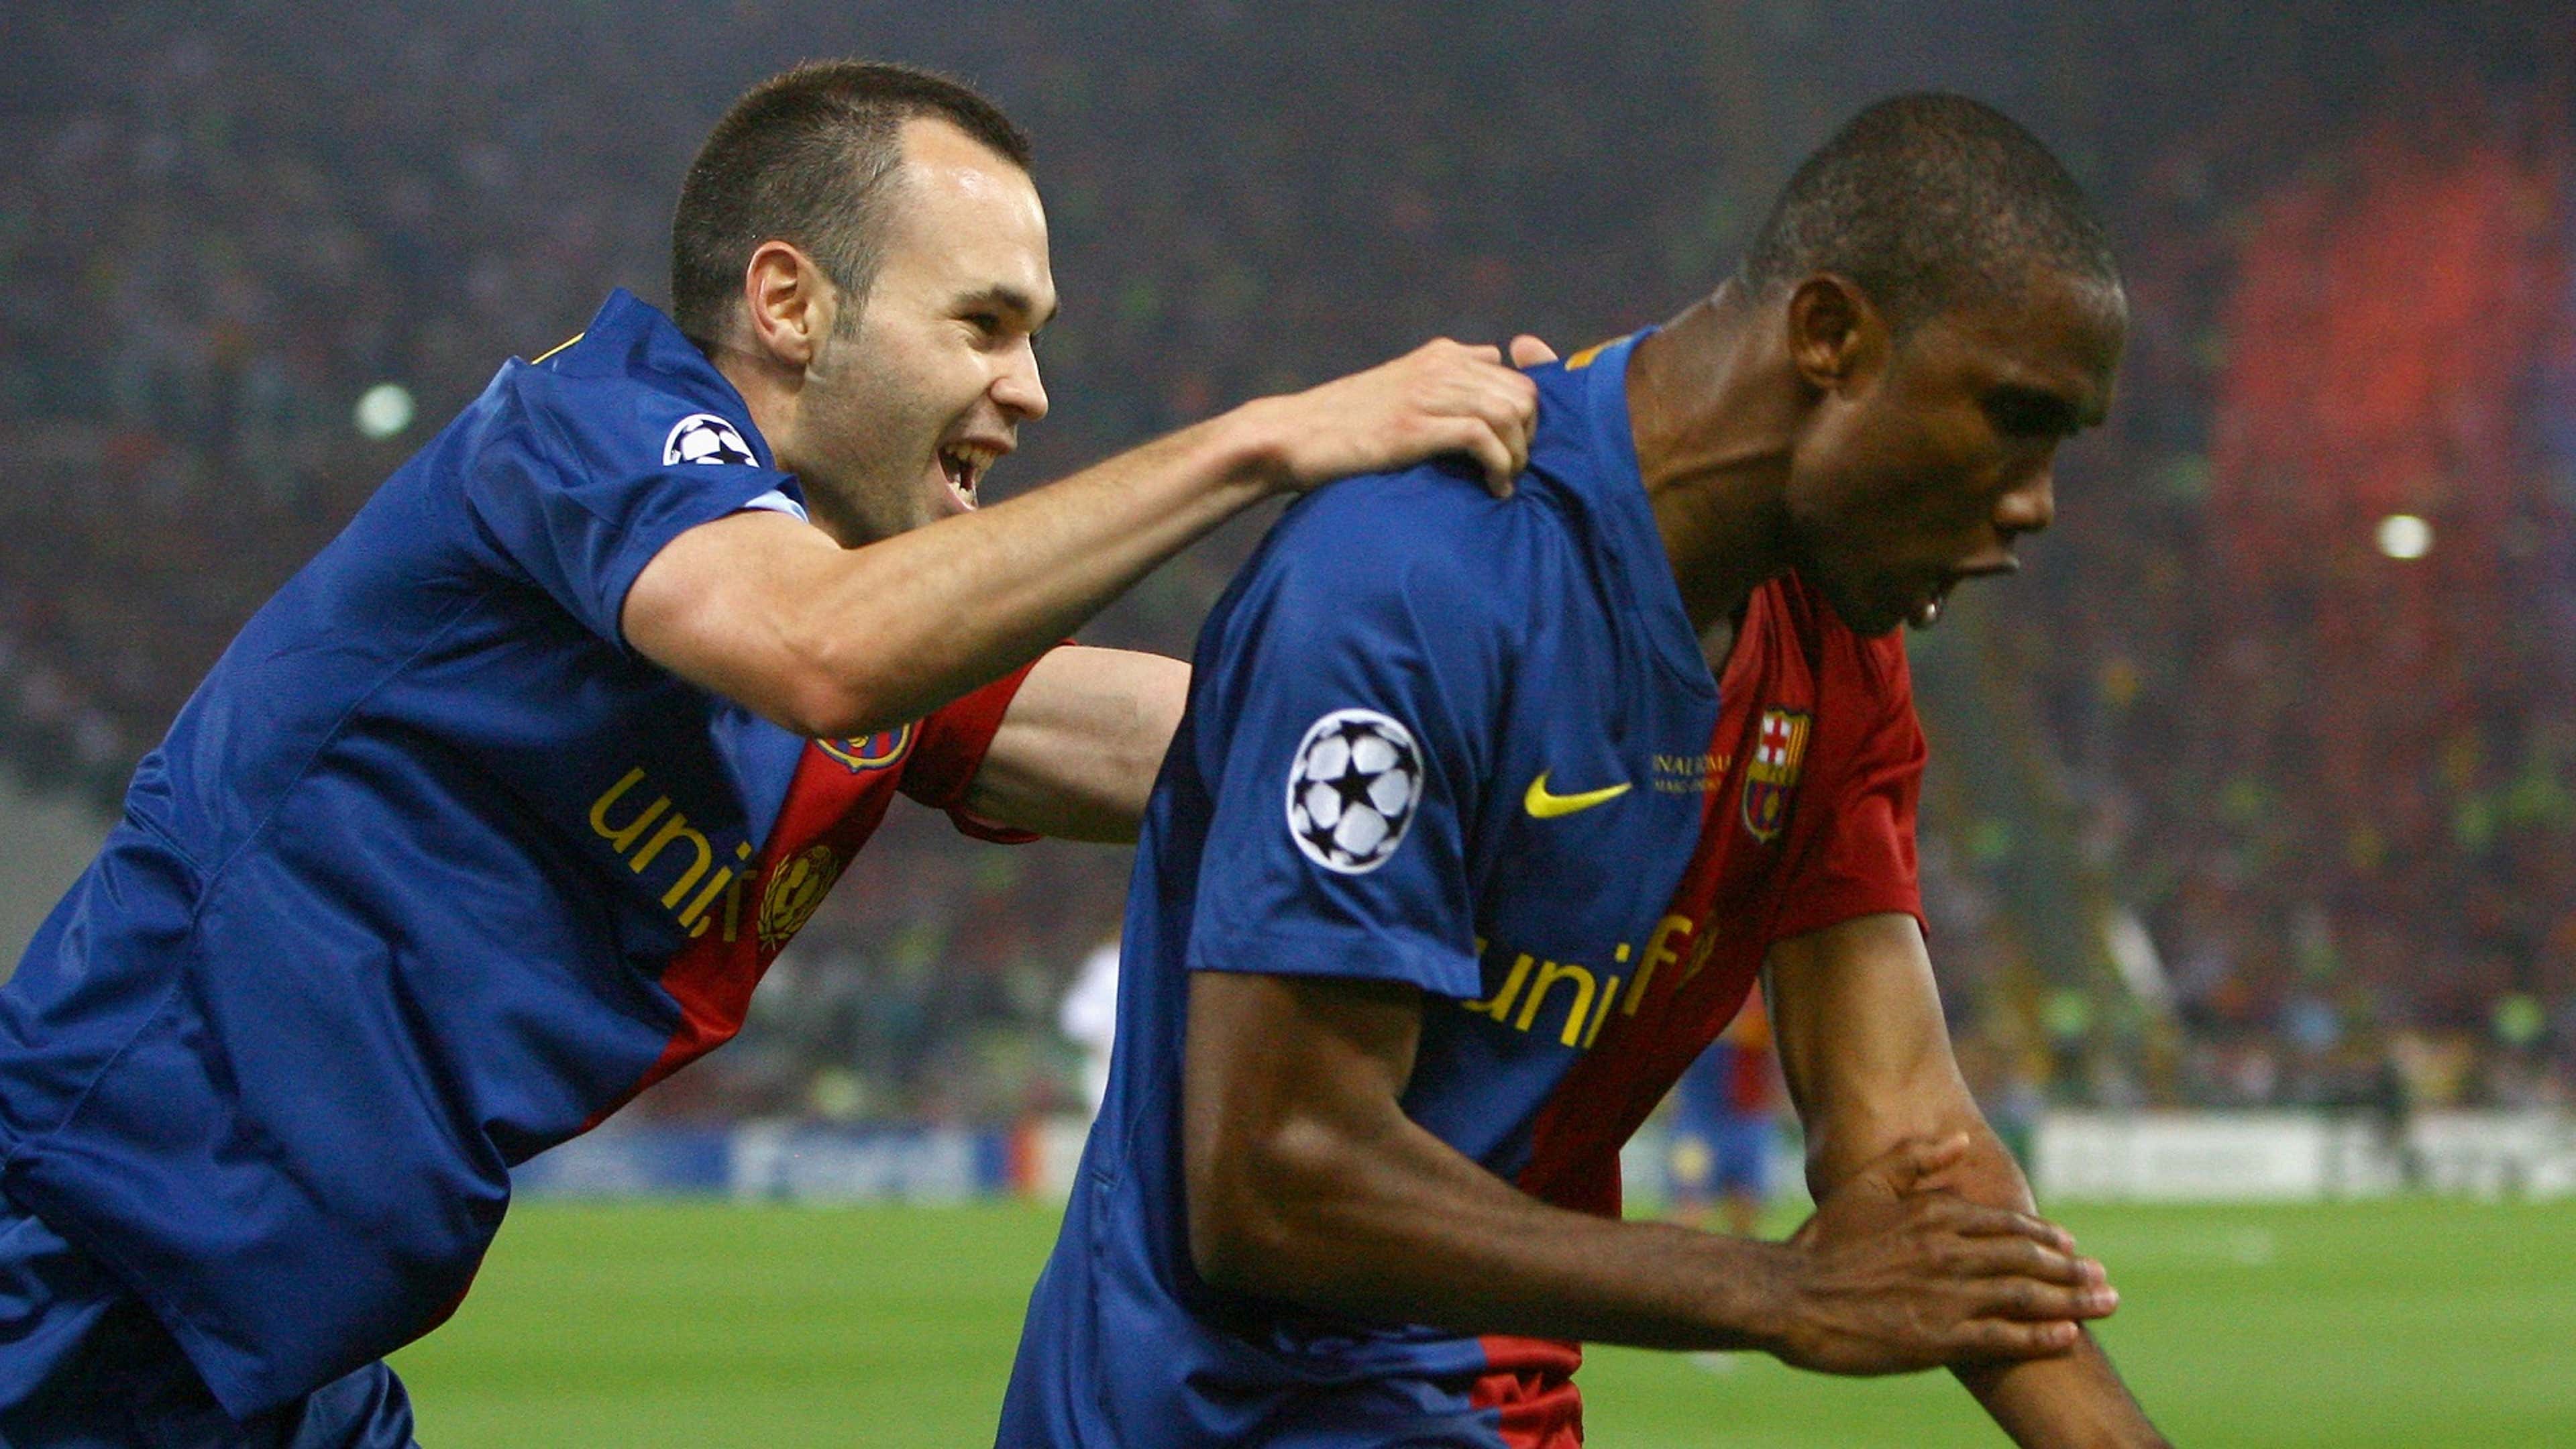 Andres Iniesta and Samuel Eto'o of Barcelona during the UEFA Champions League Final match against Manchester United on May 27, 2009